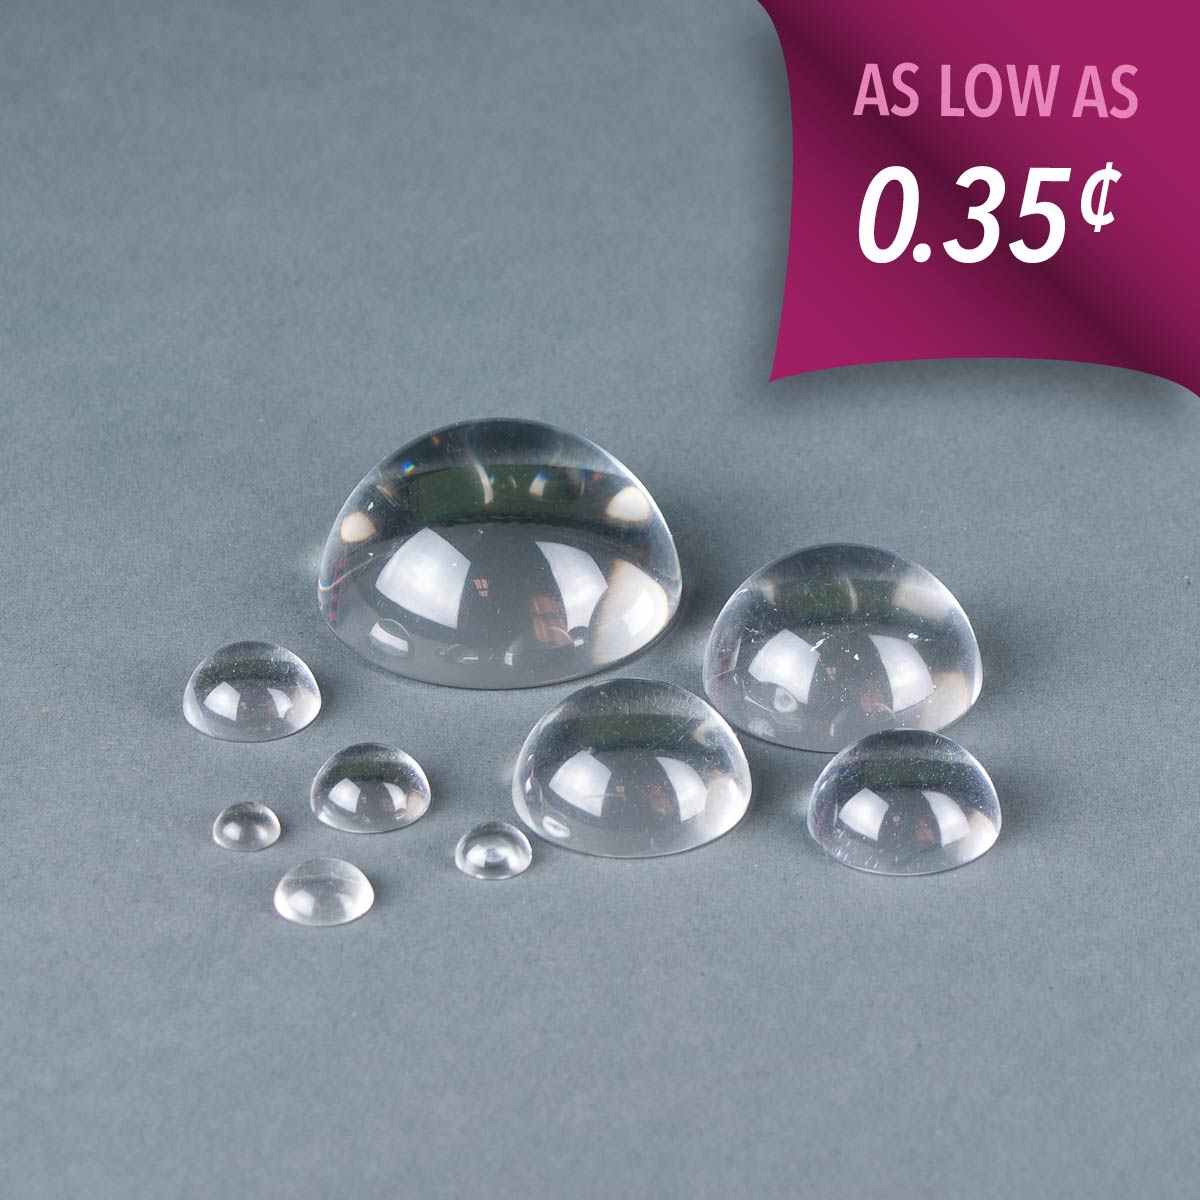 Clear acrylic cabochon half-spheres available in various diameters